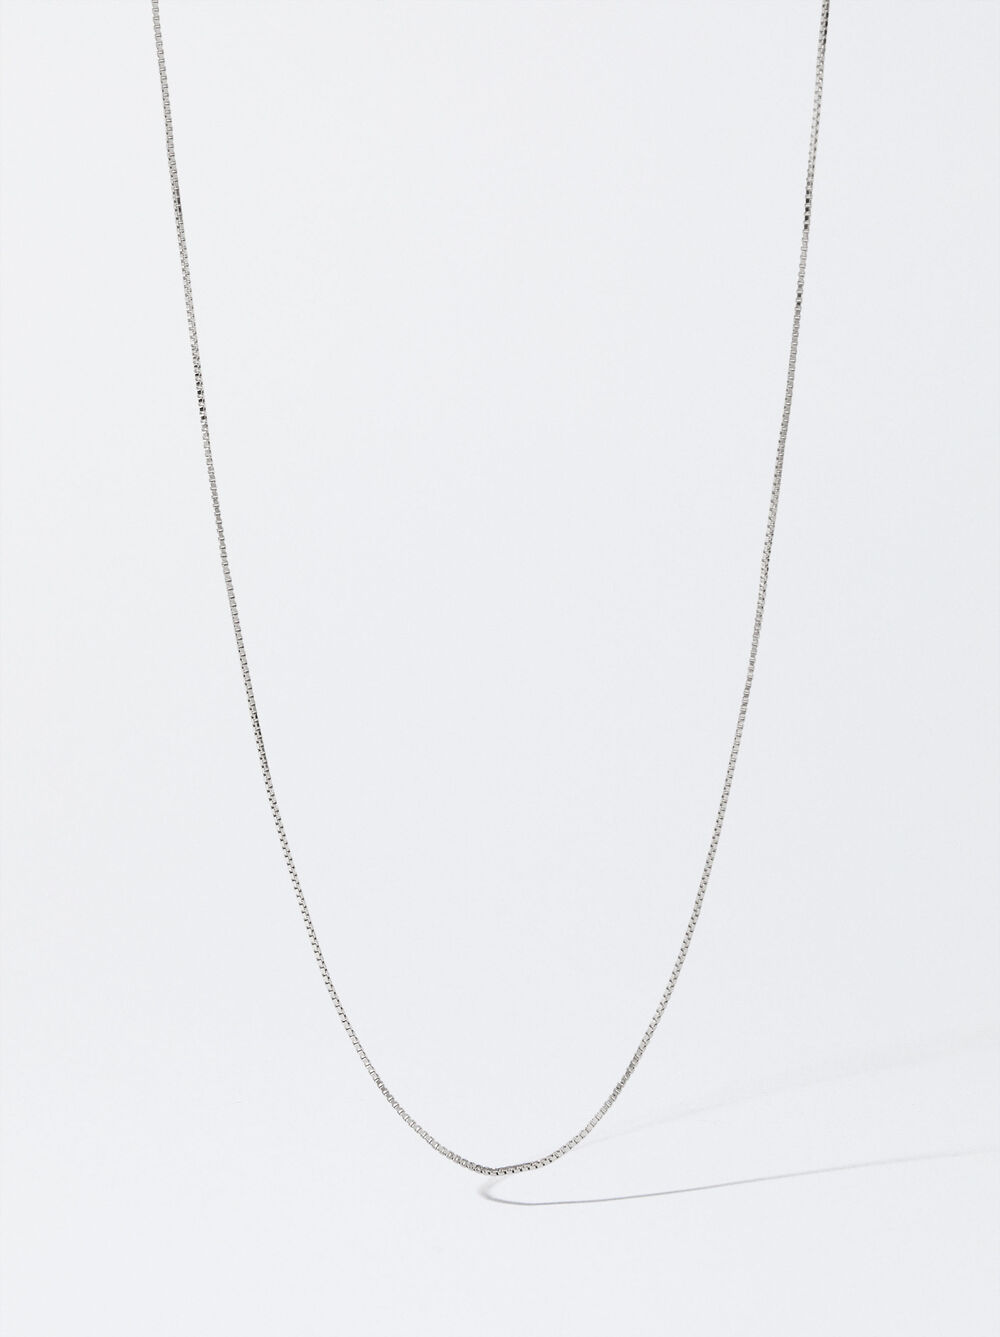 925 Silver Personalised Thin Chain Necklace